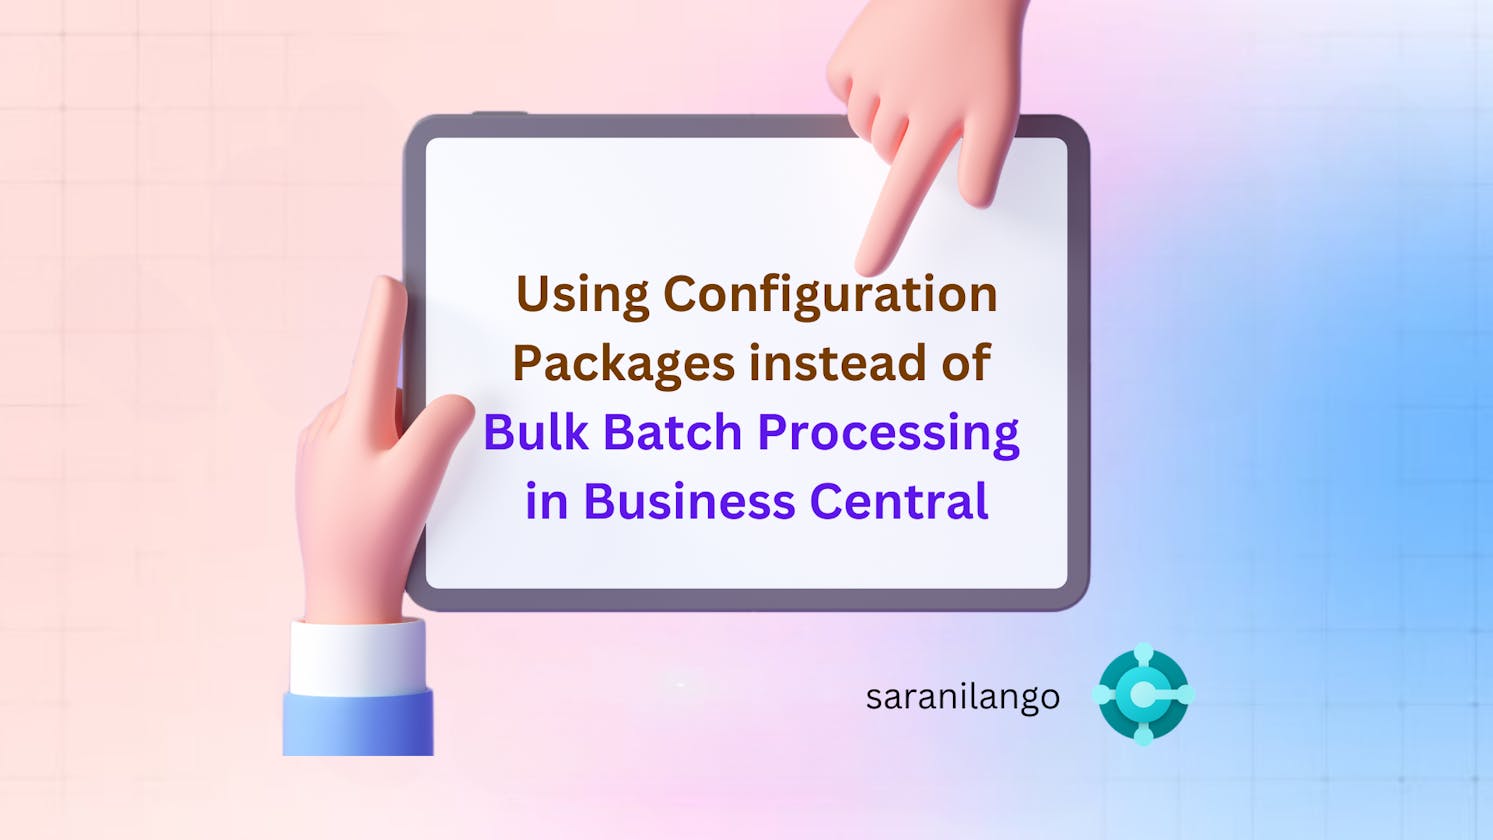 Using Configuration Package in Business Central as an alternative to Bulk Batch Processing